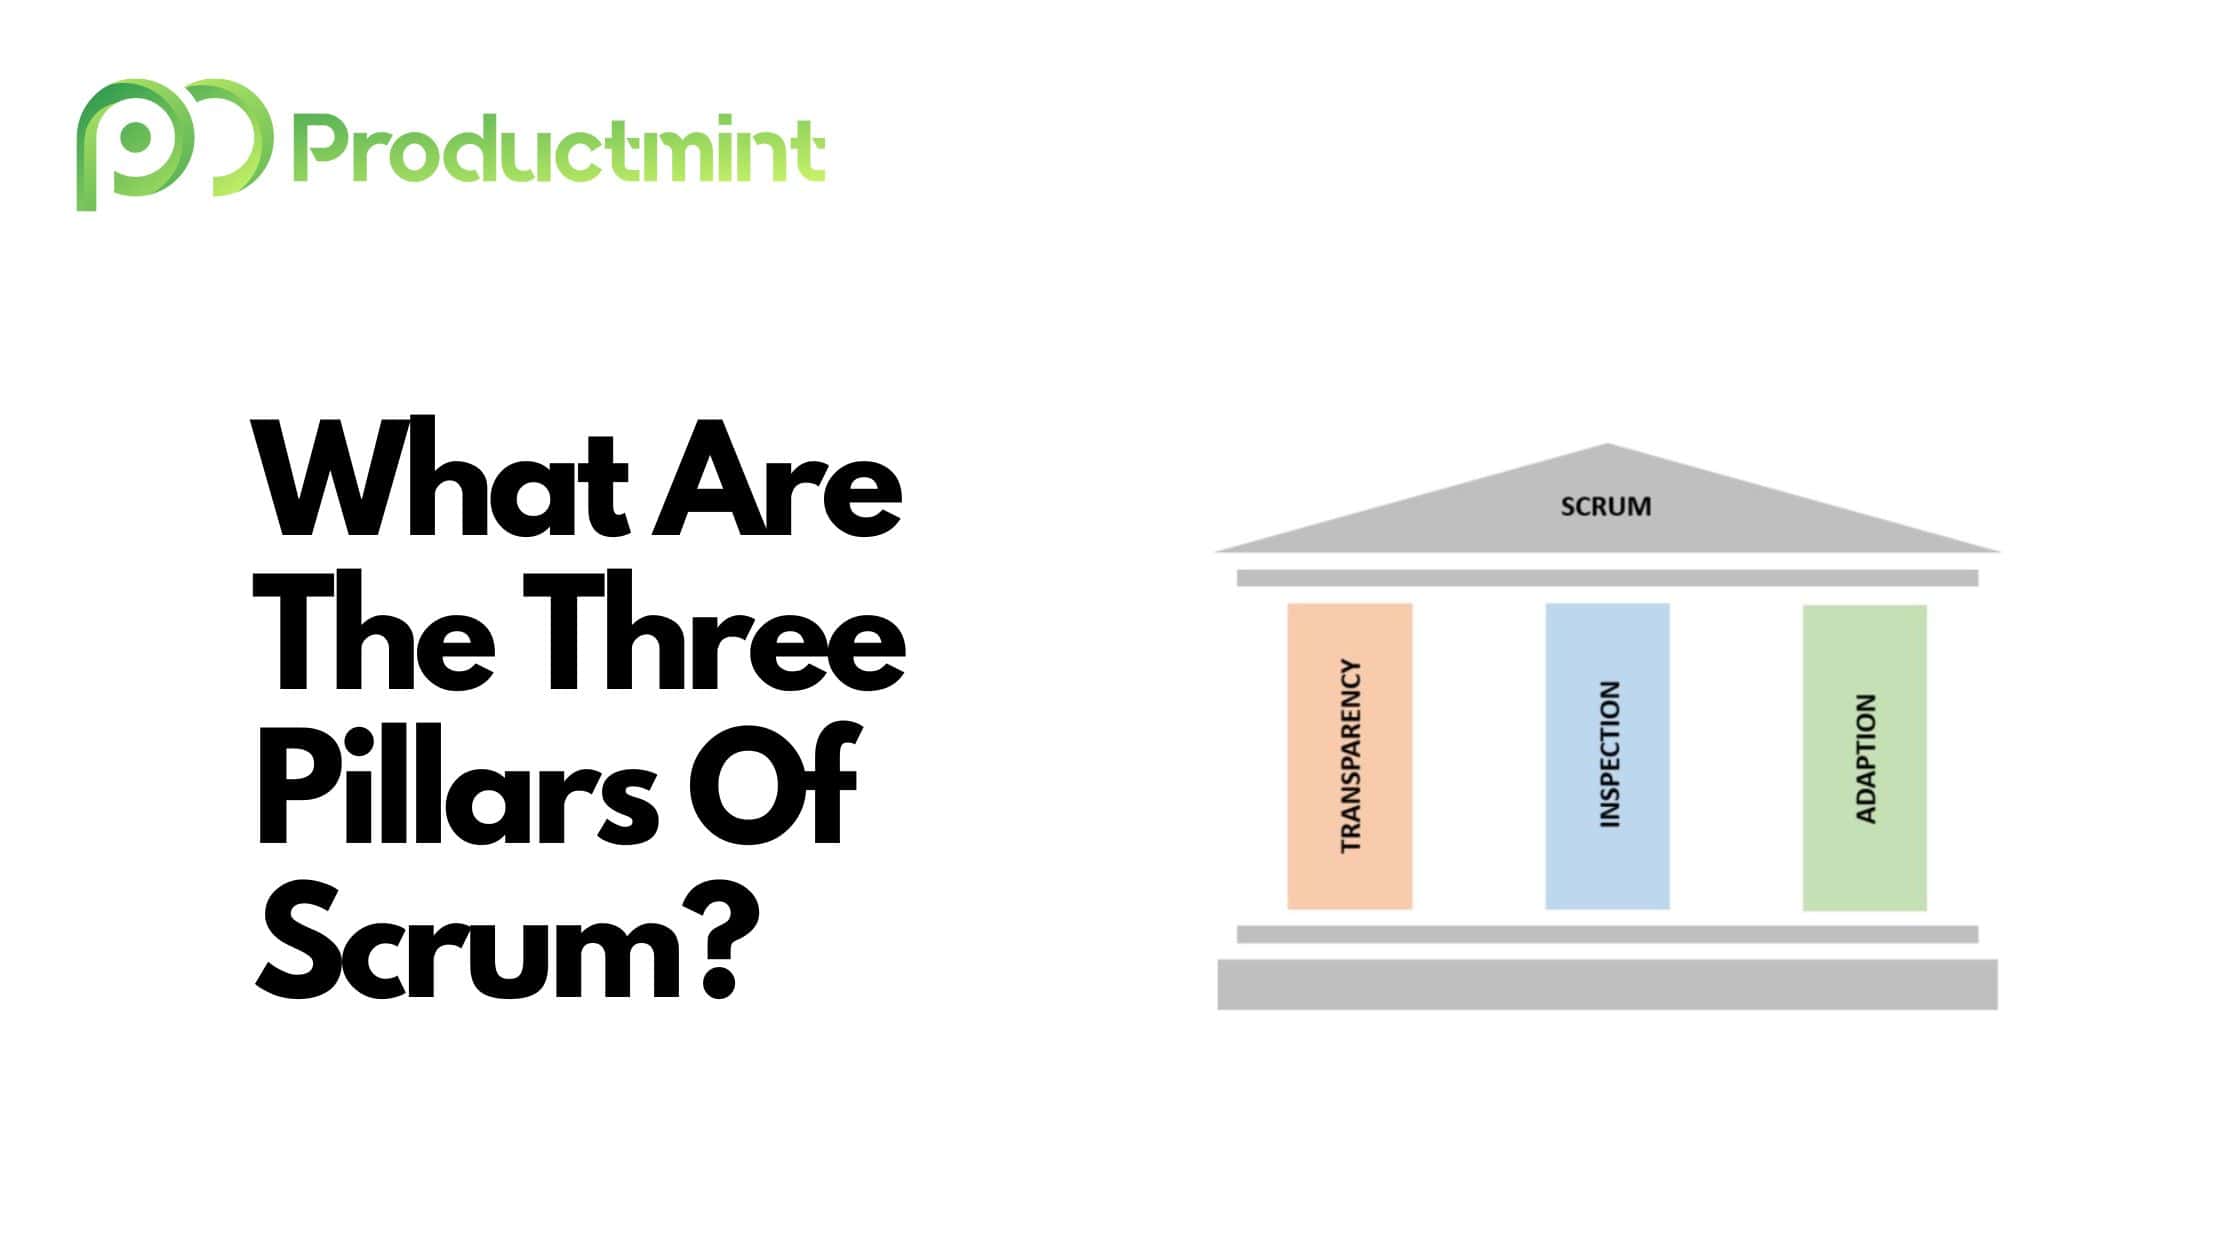 What Are The Three Pillars Of Scrum